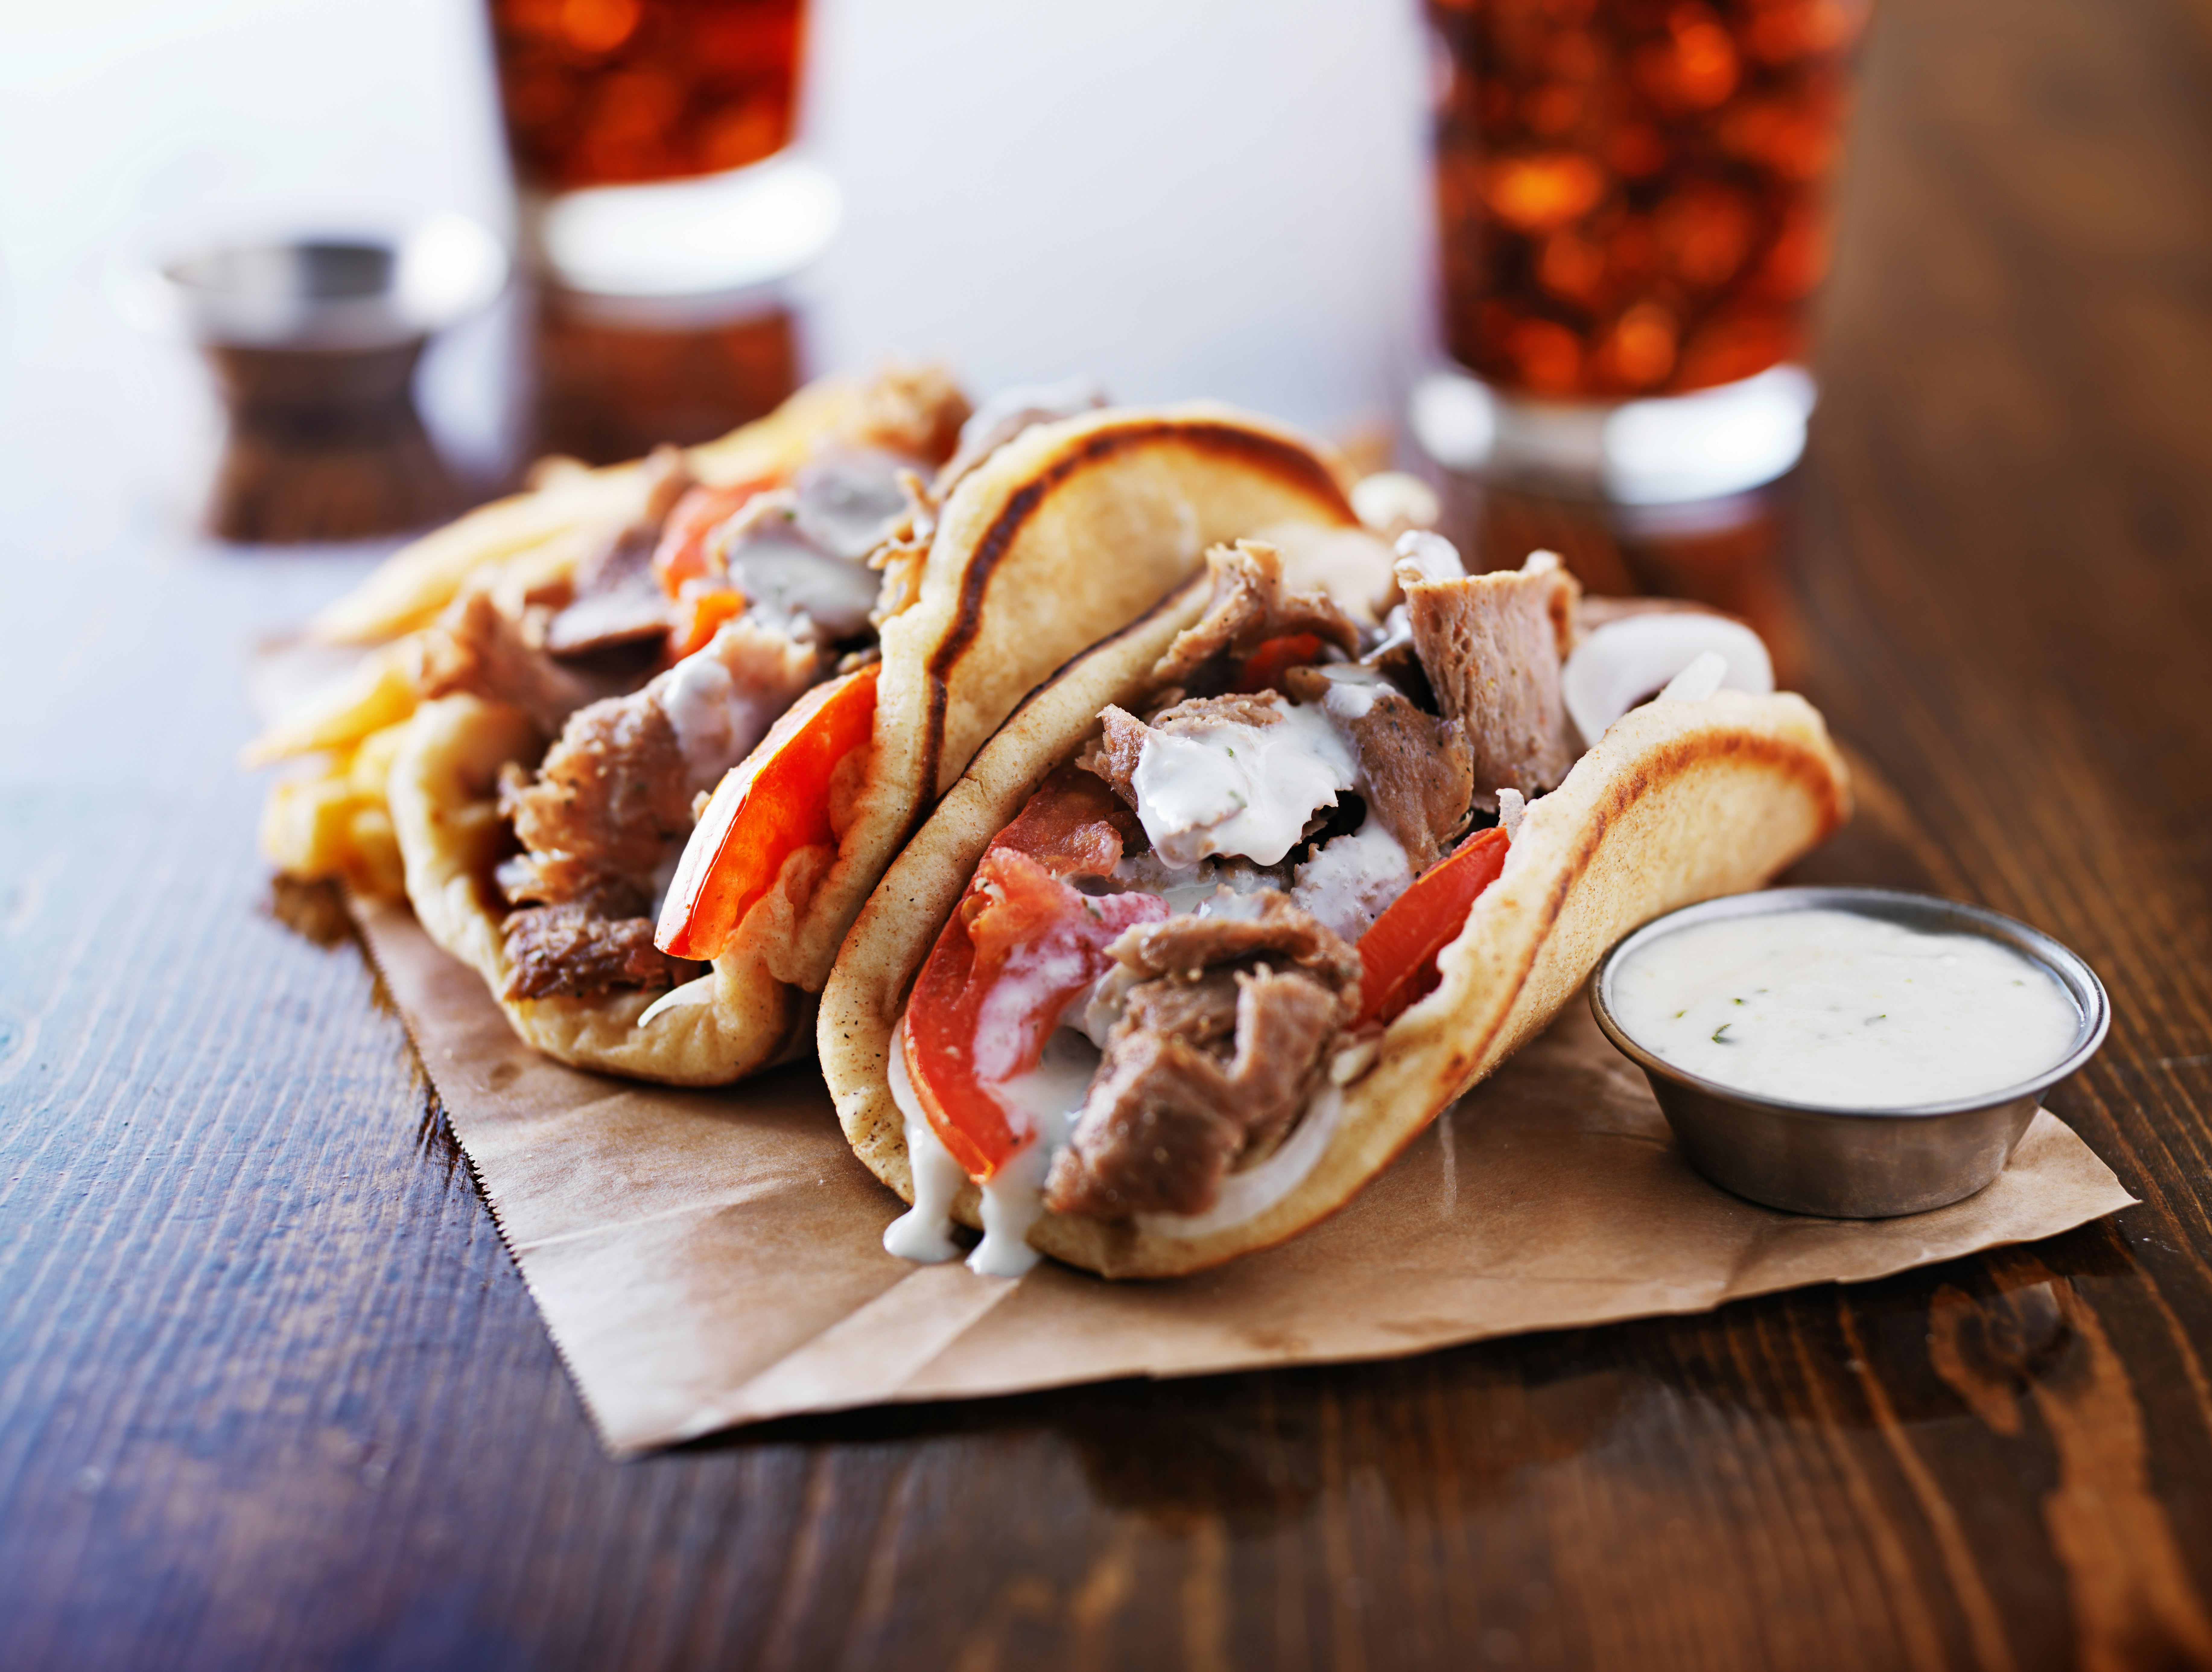 Greek gyros served with tzatziki sauce and fries on a wooden table with two glasses of cola in the background.